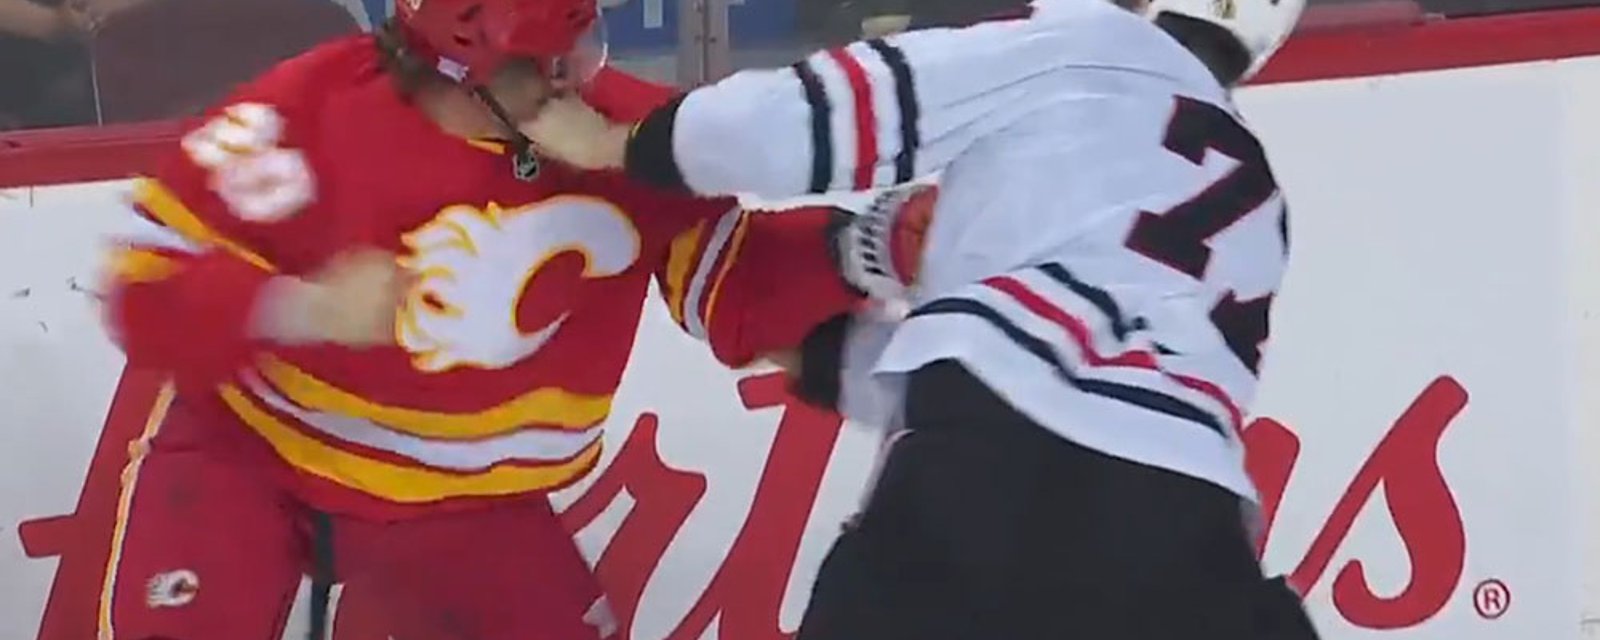 WATCH: Kirby Dach tosses absolute Bombs in his 1st career NHL fight